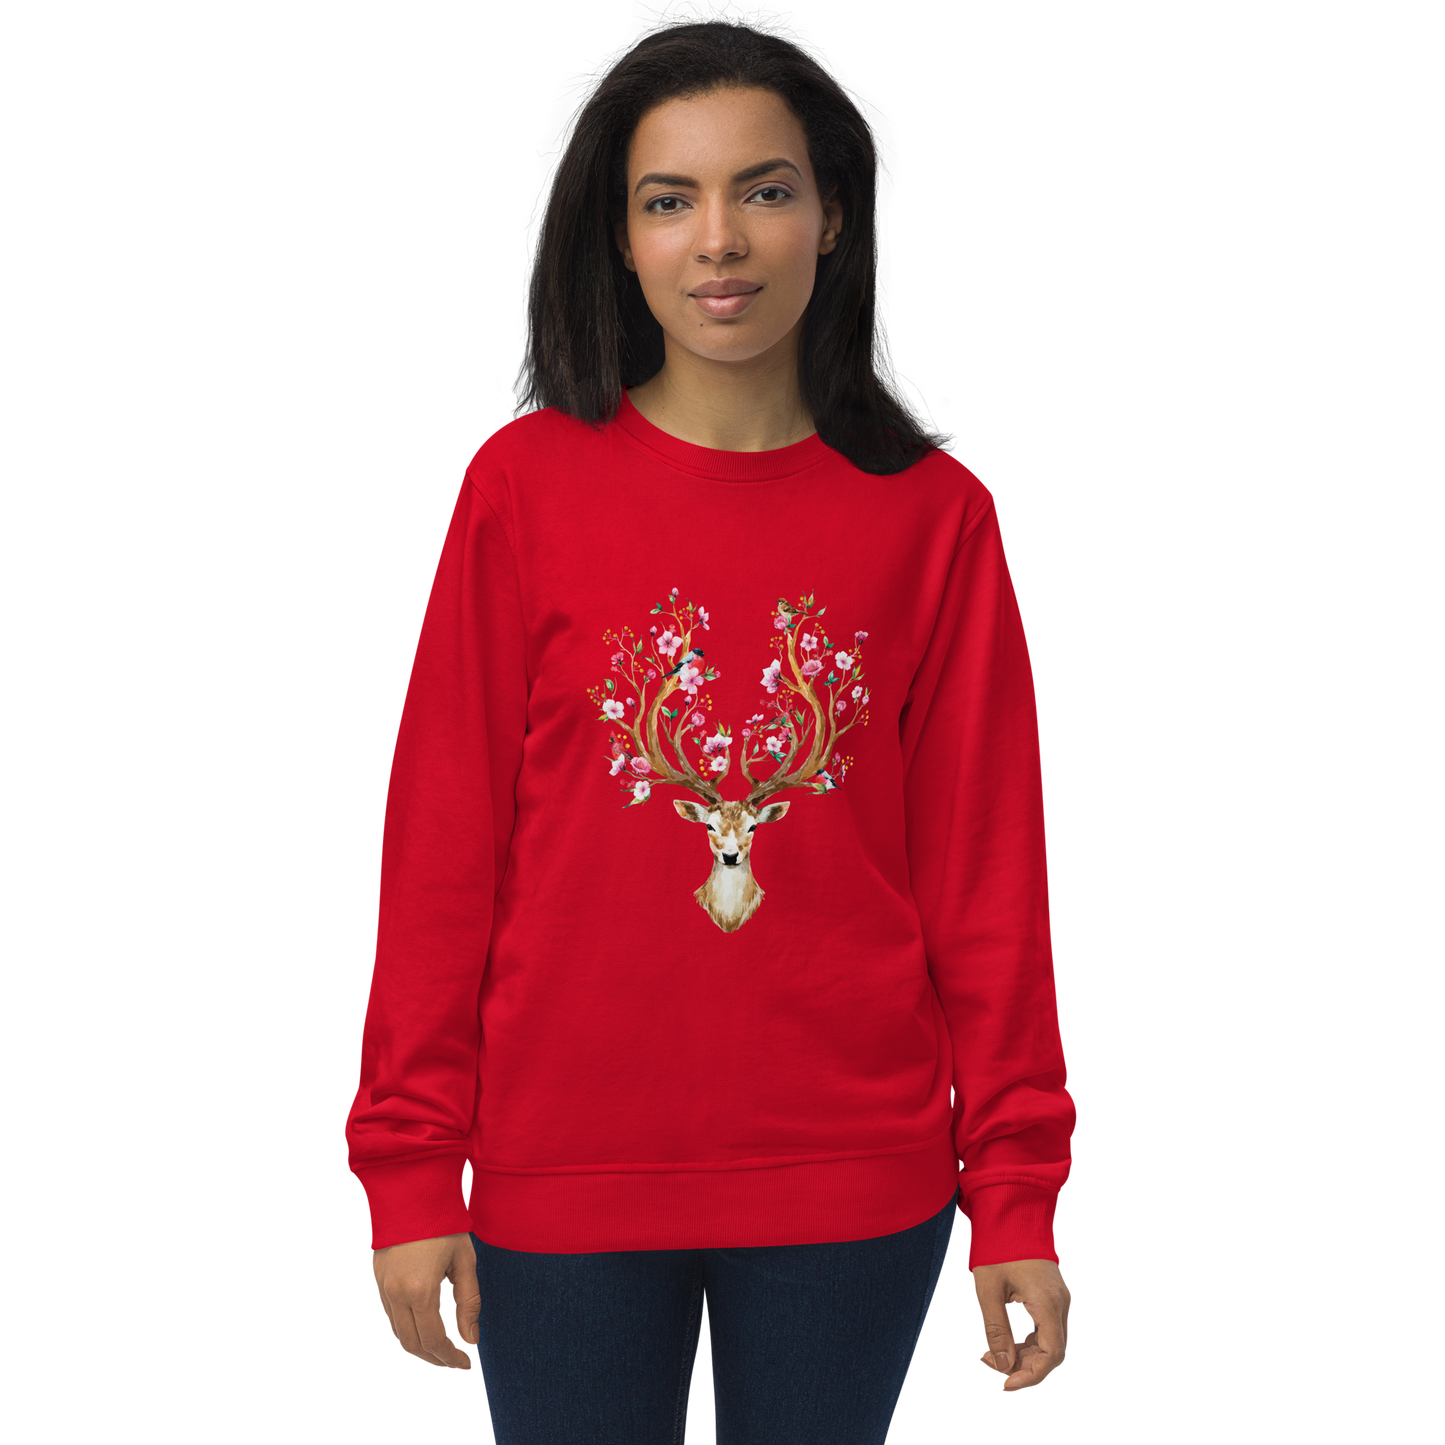 Woman Wearing a Red Organic Cotton Red Deer Sweatshirt showcasing a captivating Floral Red Deer graphic on the chest - Cute Red Deer Graphic Sweatshirts - Boozy Fox